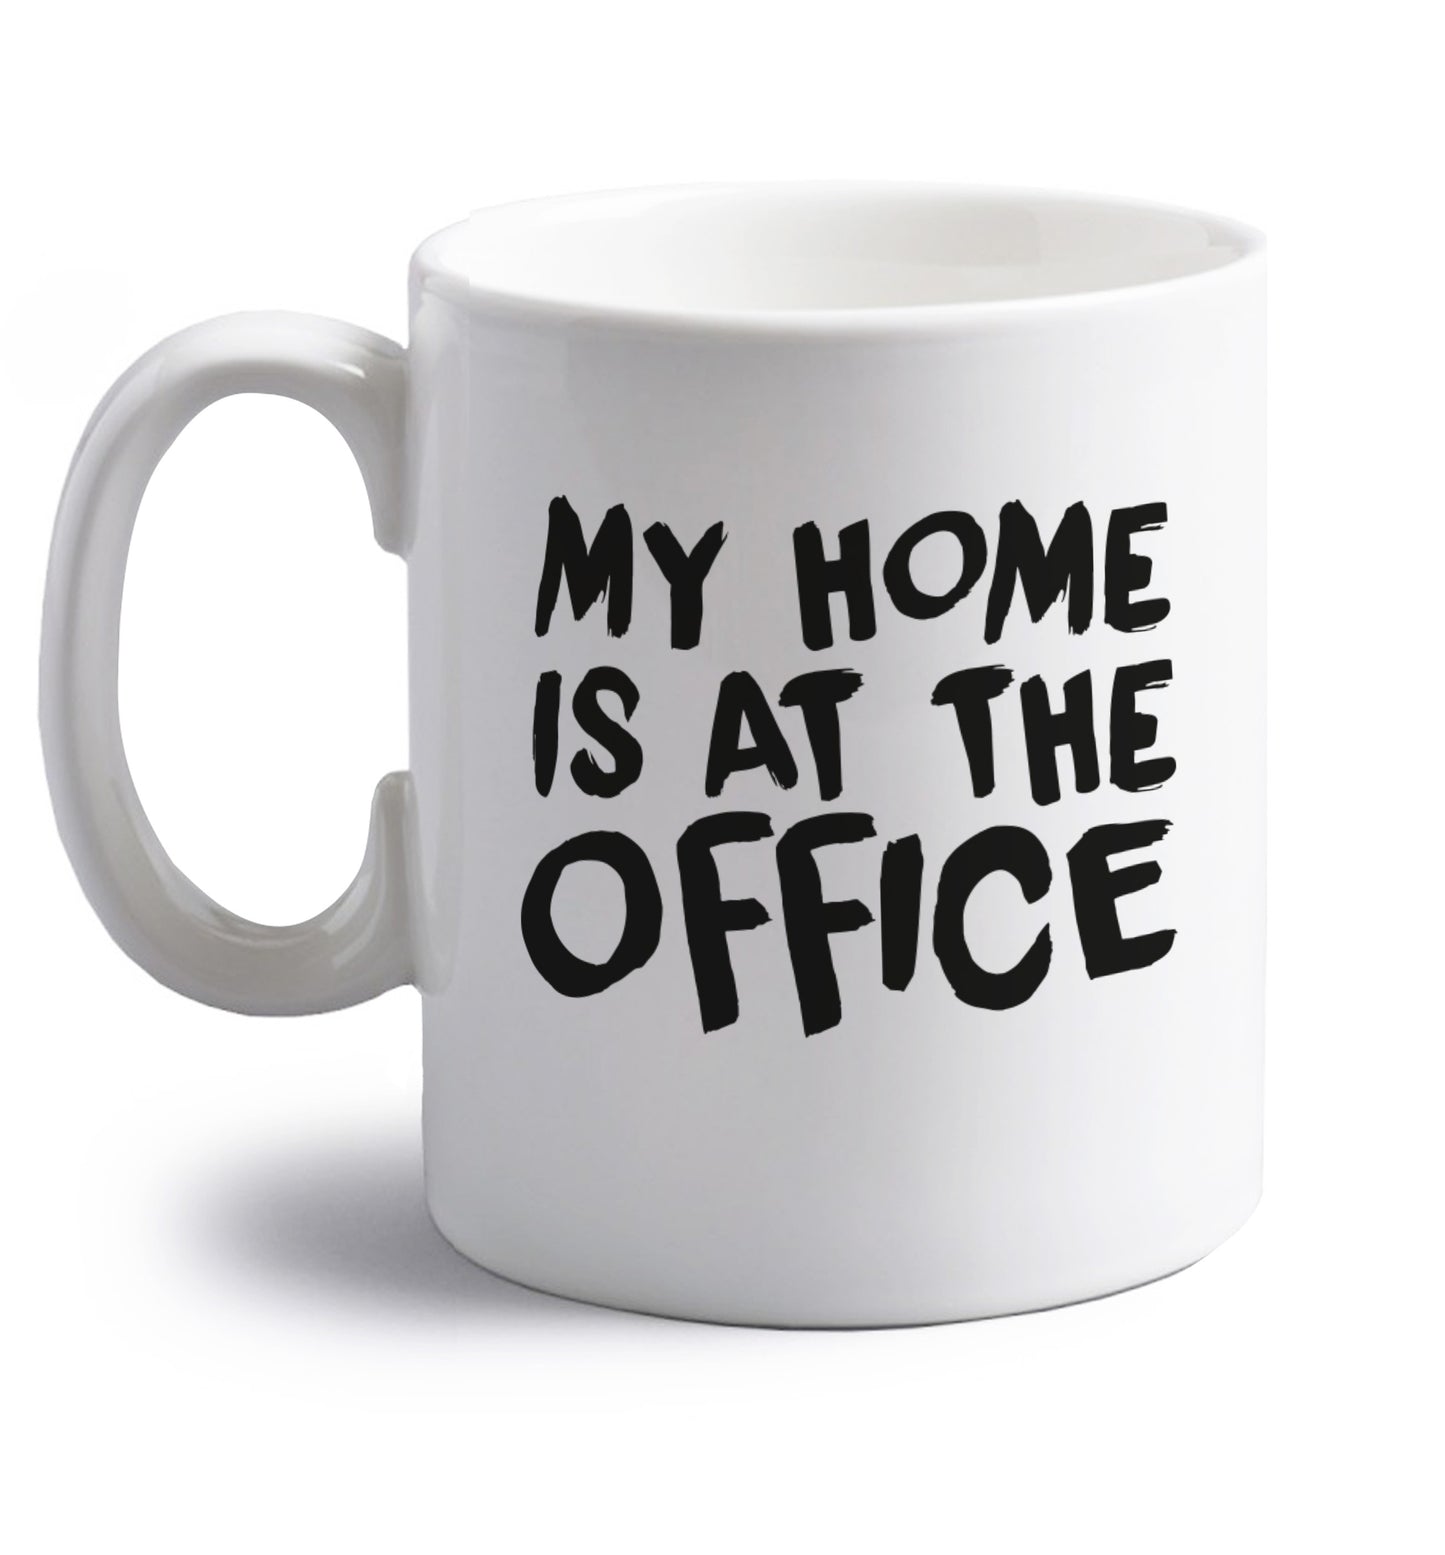 My home is at the office right handed white ceramic mug 